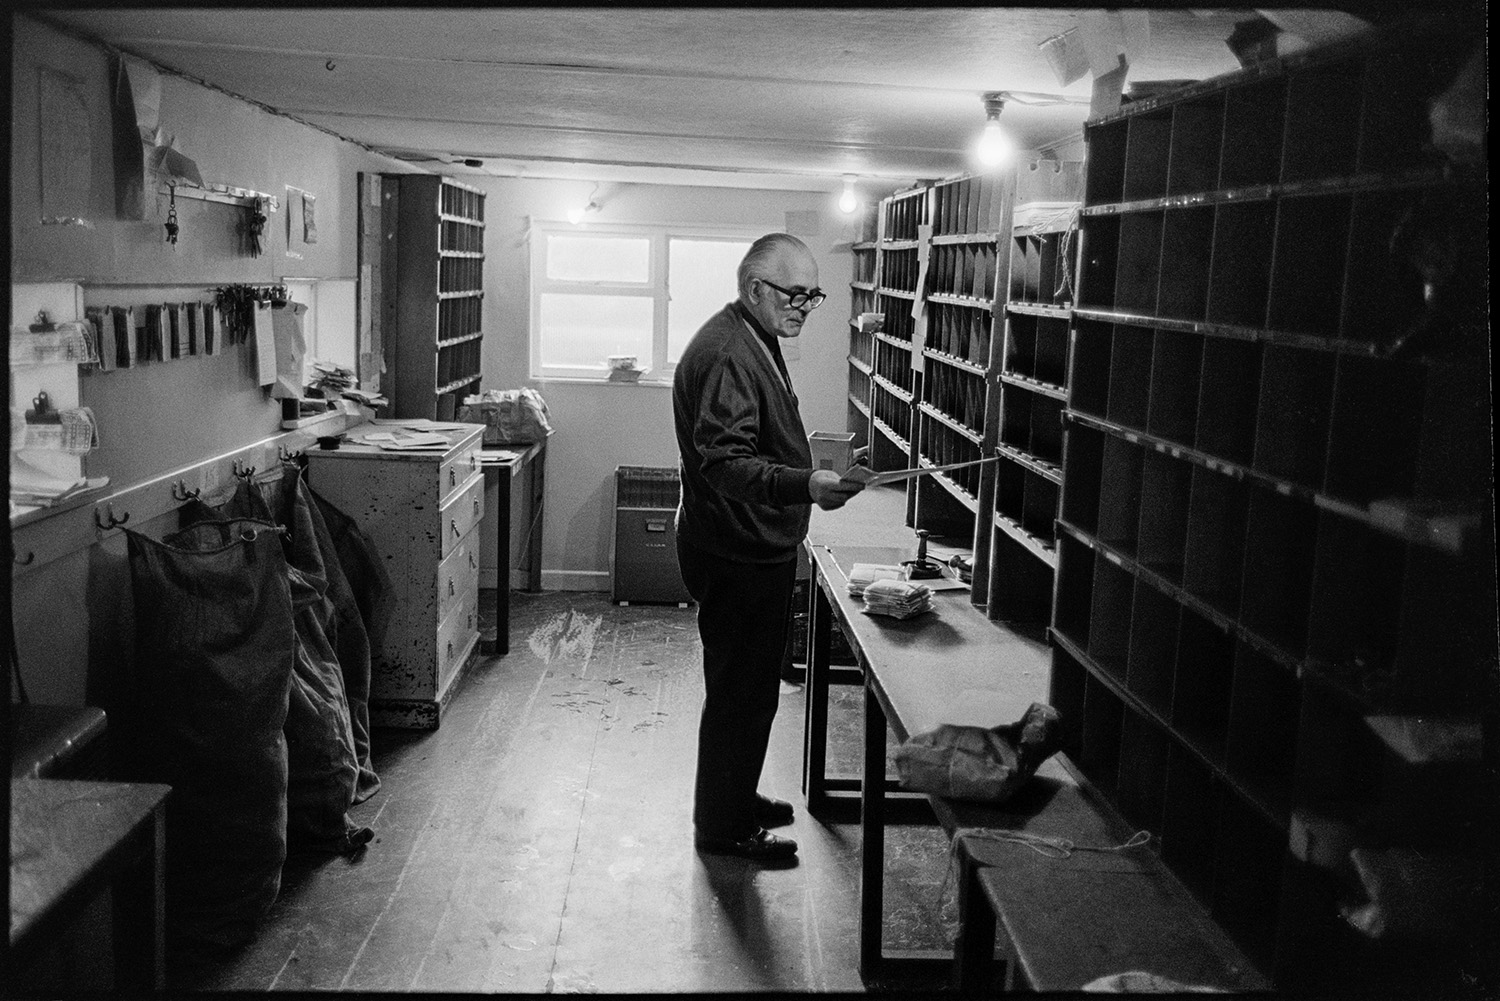 Sorting mail in sorting office. Franking mail. 
[Mr Butler sorting mail into pigeon holes in the sorting office at Winkleigh Post Office. Sacks of mail can be seen on the other side of the room.]